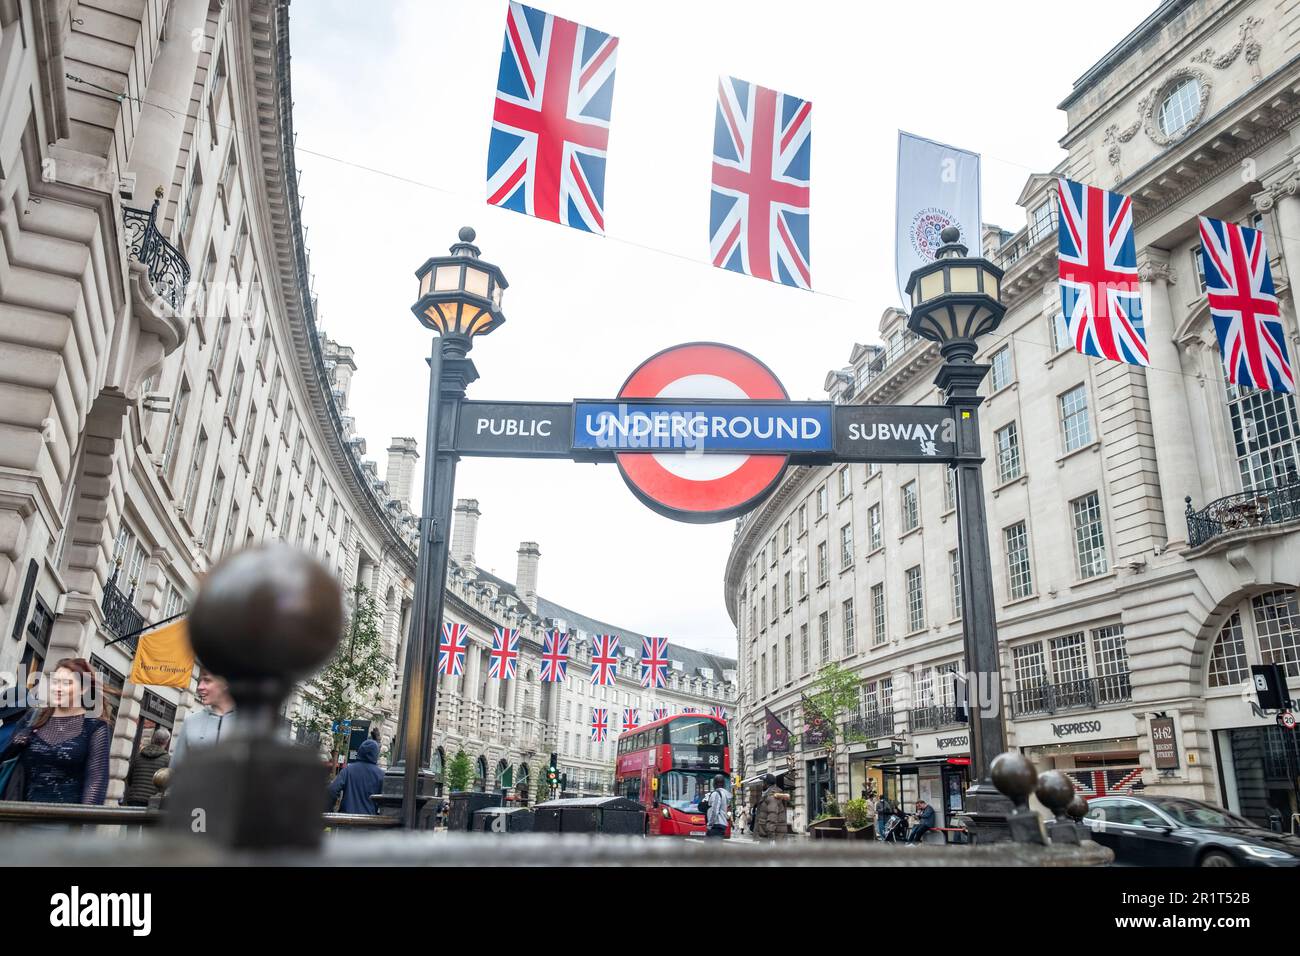 London- May 2023: View of Regent Street in London with Piccadilly Circus underground station in foreground. Stock Photo